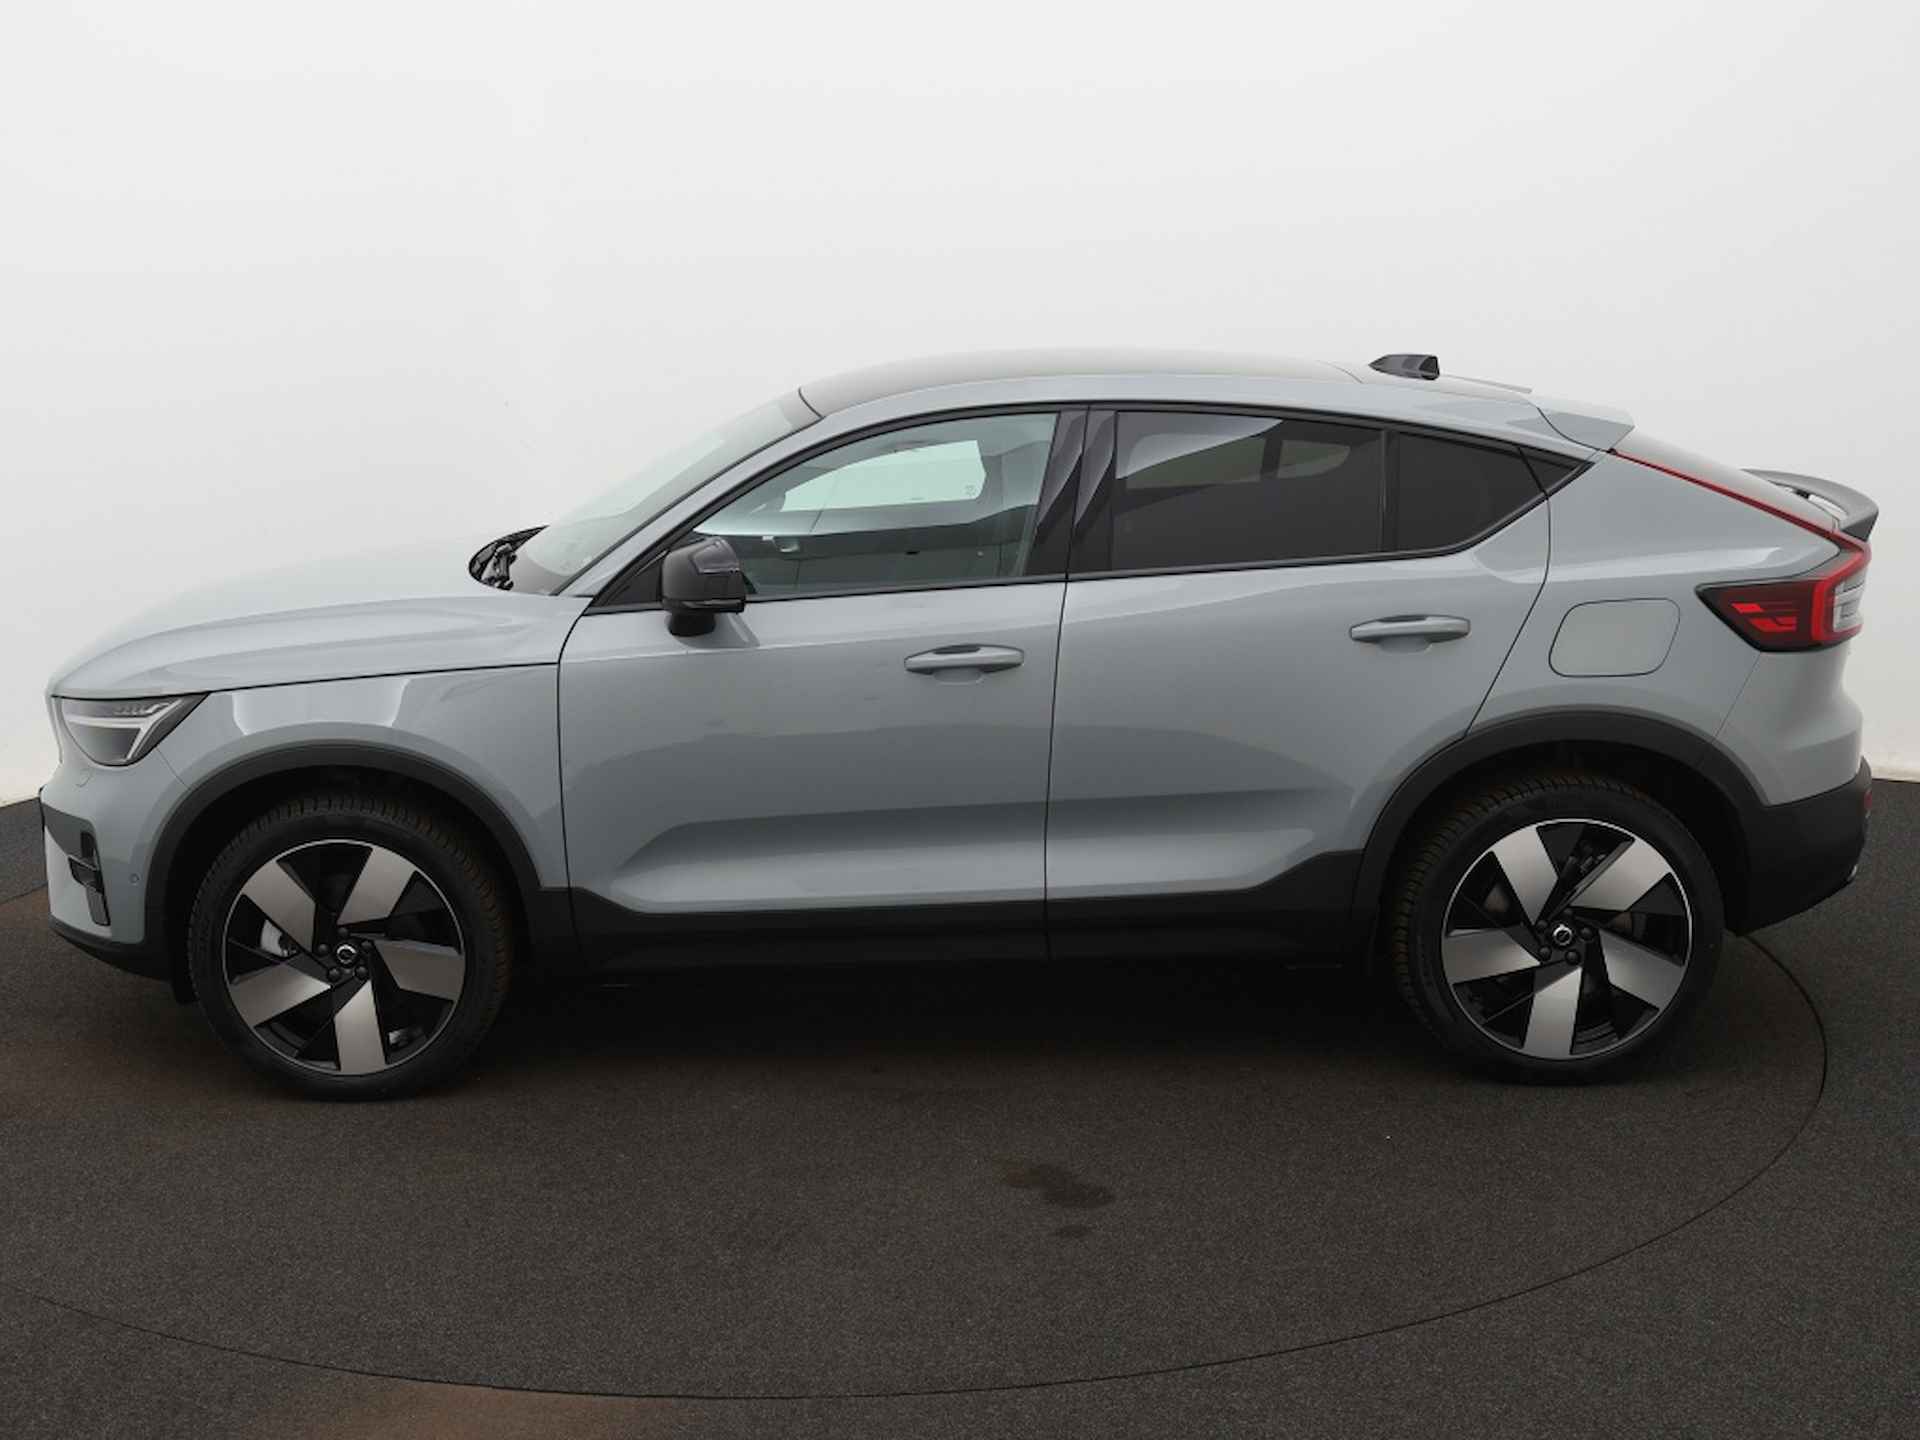 Volvo C40 Extended Ult 82 kWh - 2/43